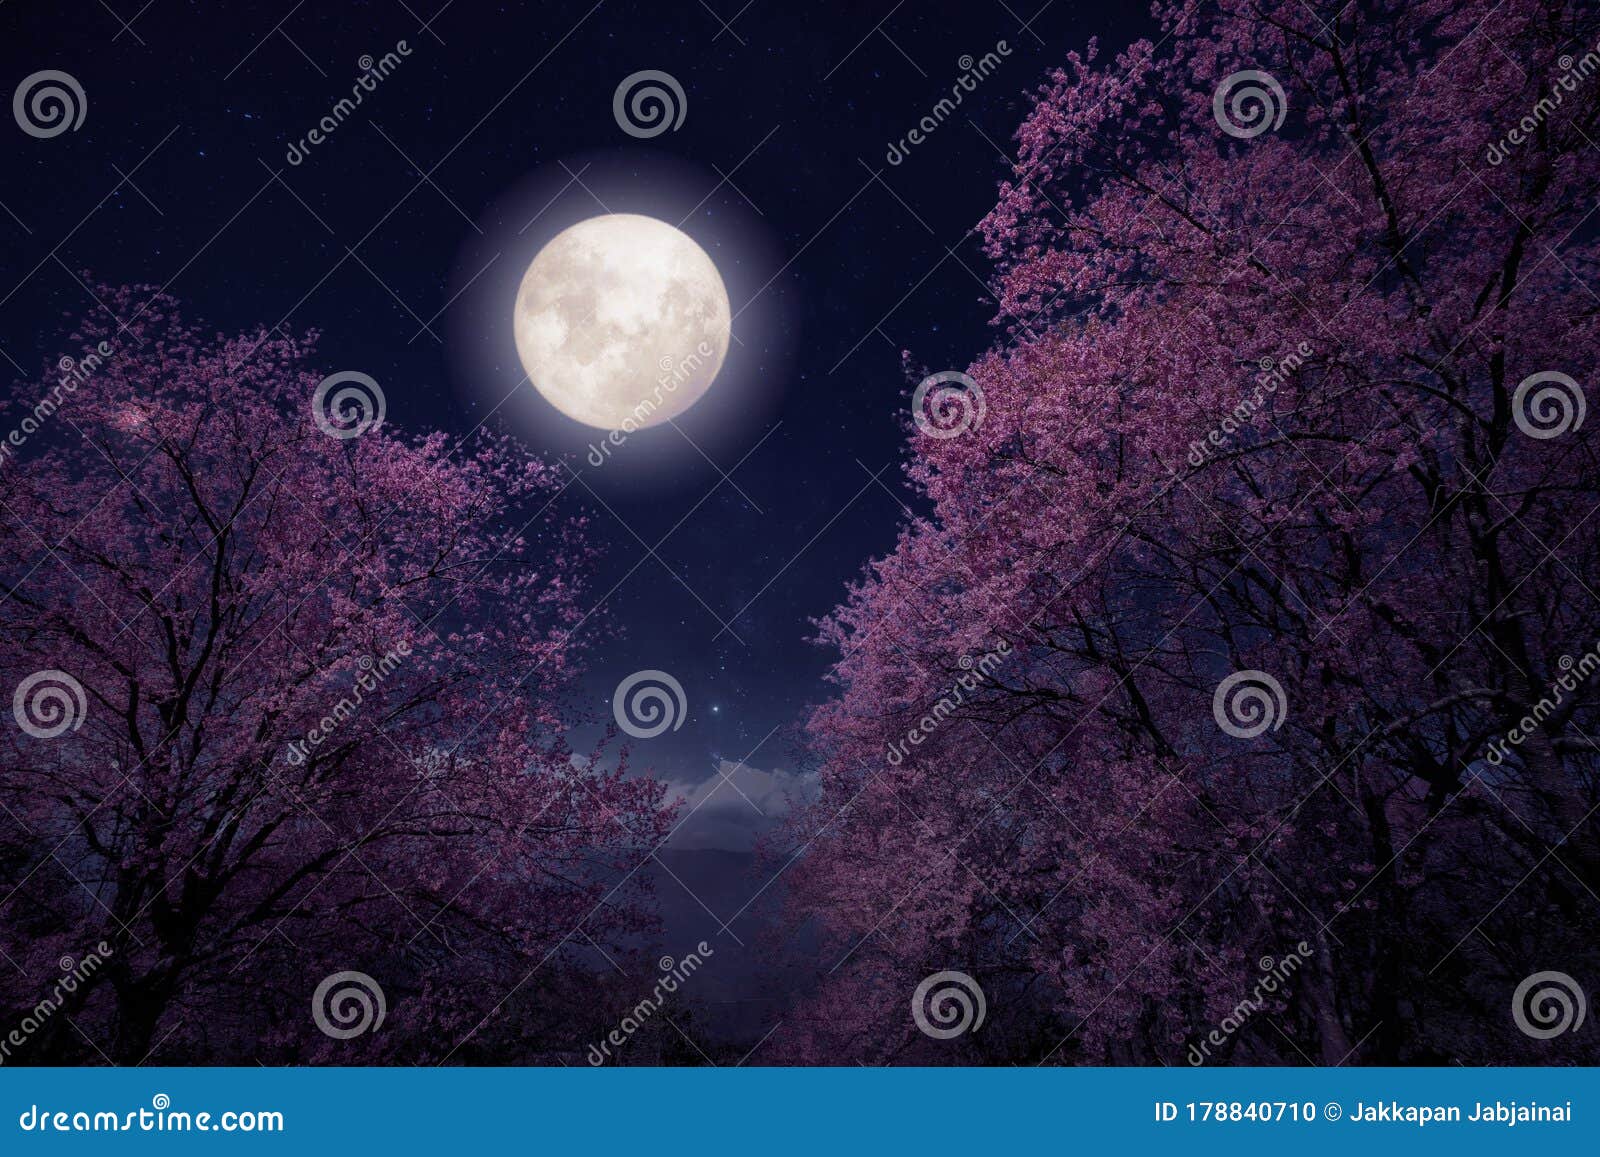 HD wallpaper red leafed tree illustration cherry blossom sky nature  night  Wallpaper Flare